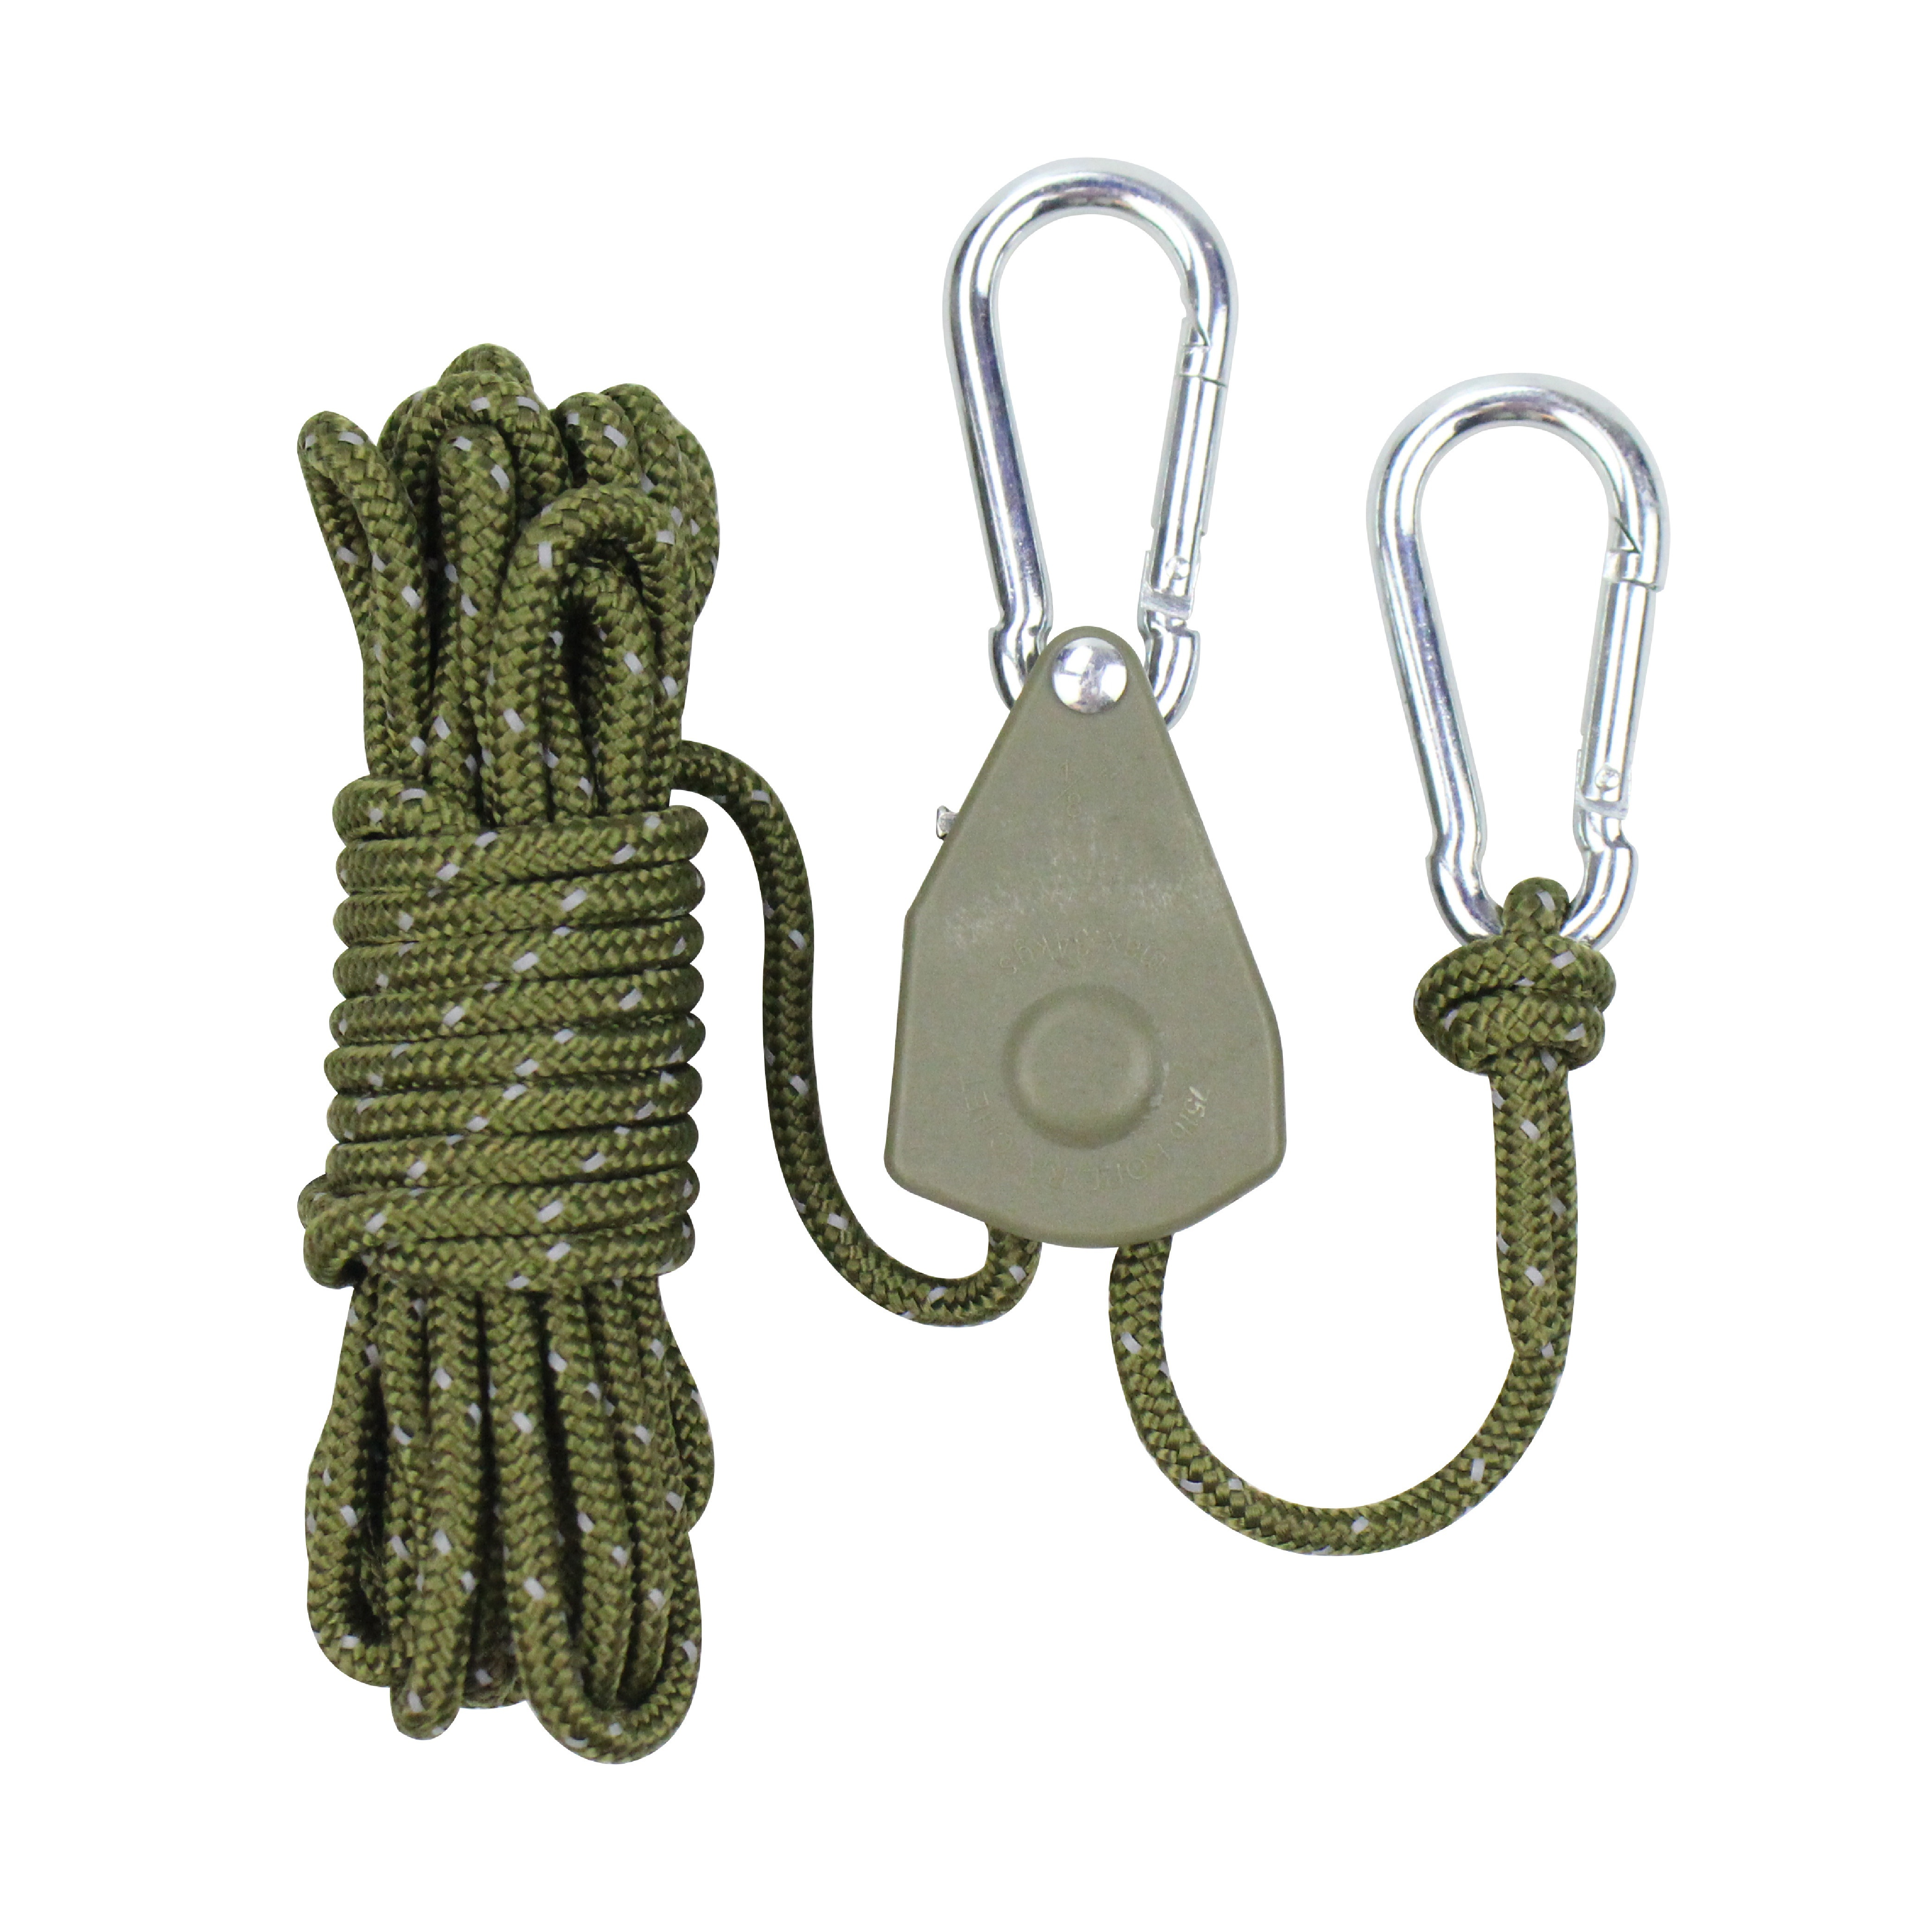 Heavy Duty Adjustable Wind Rope With Metal Pulley Reflective - Temu